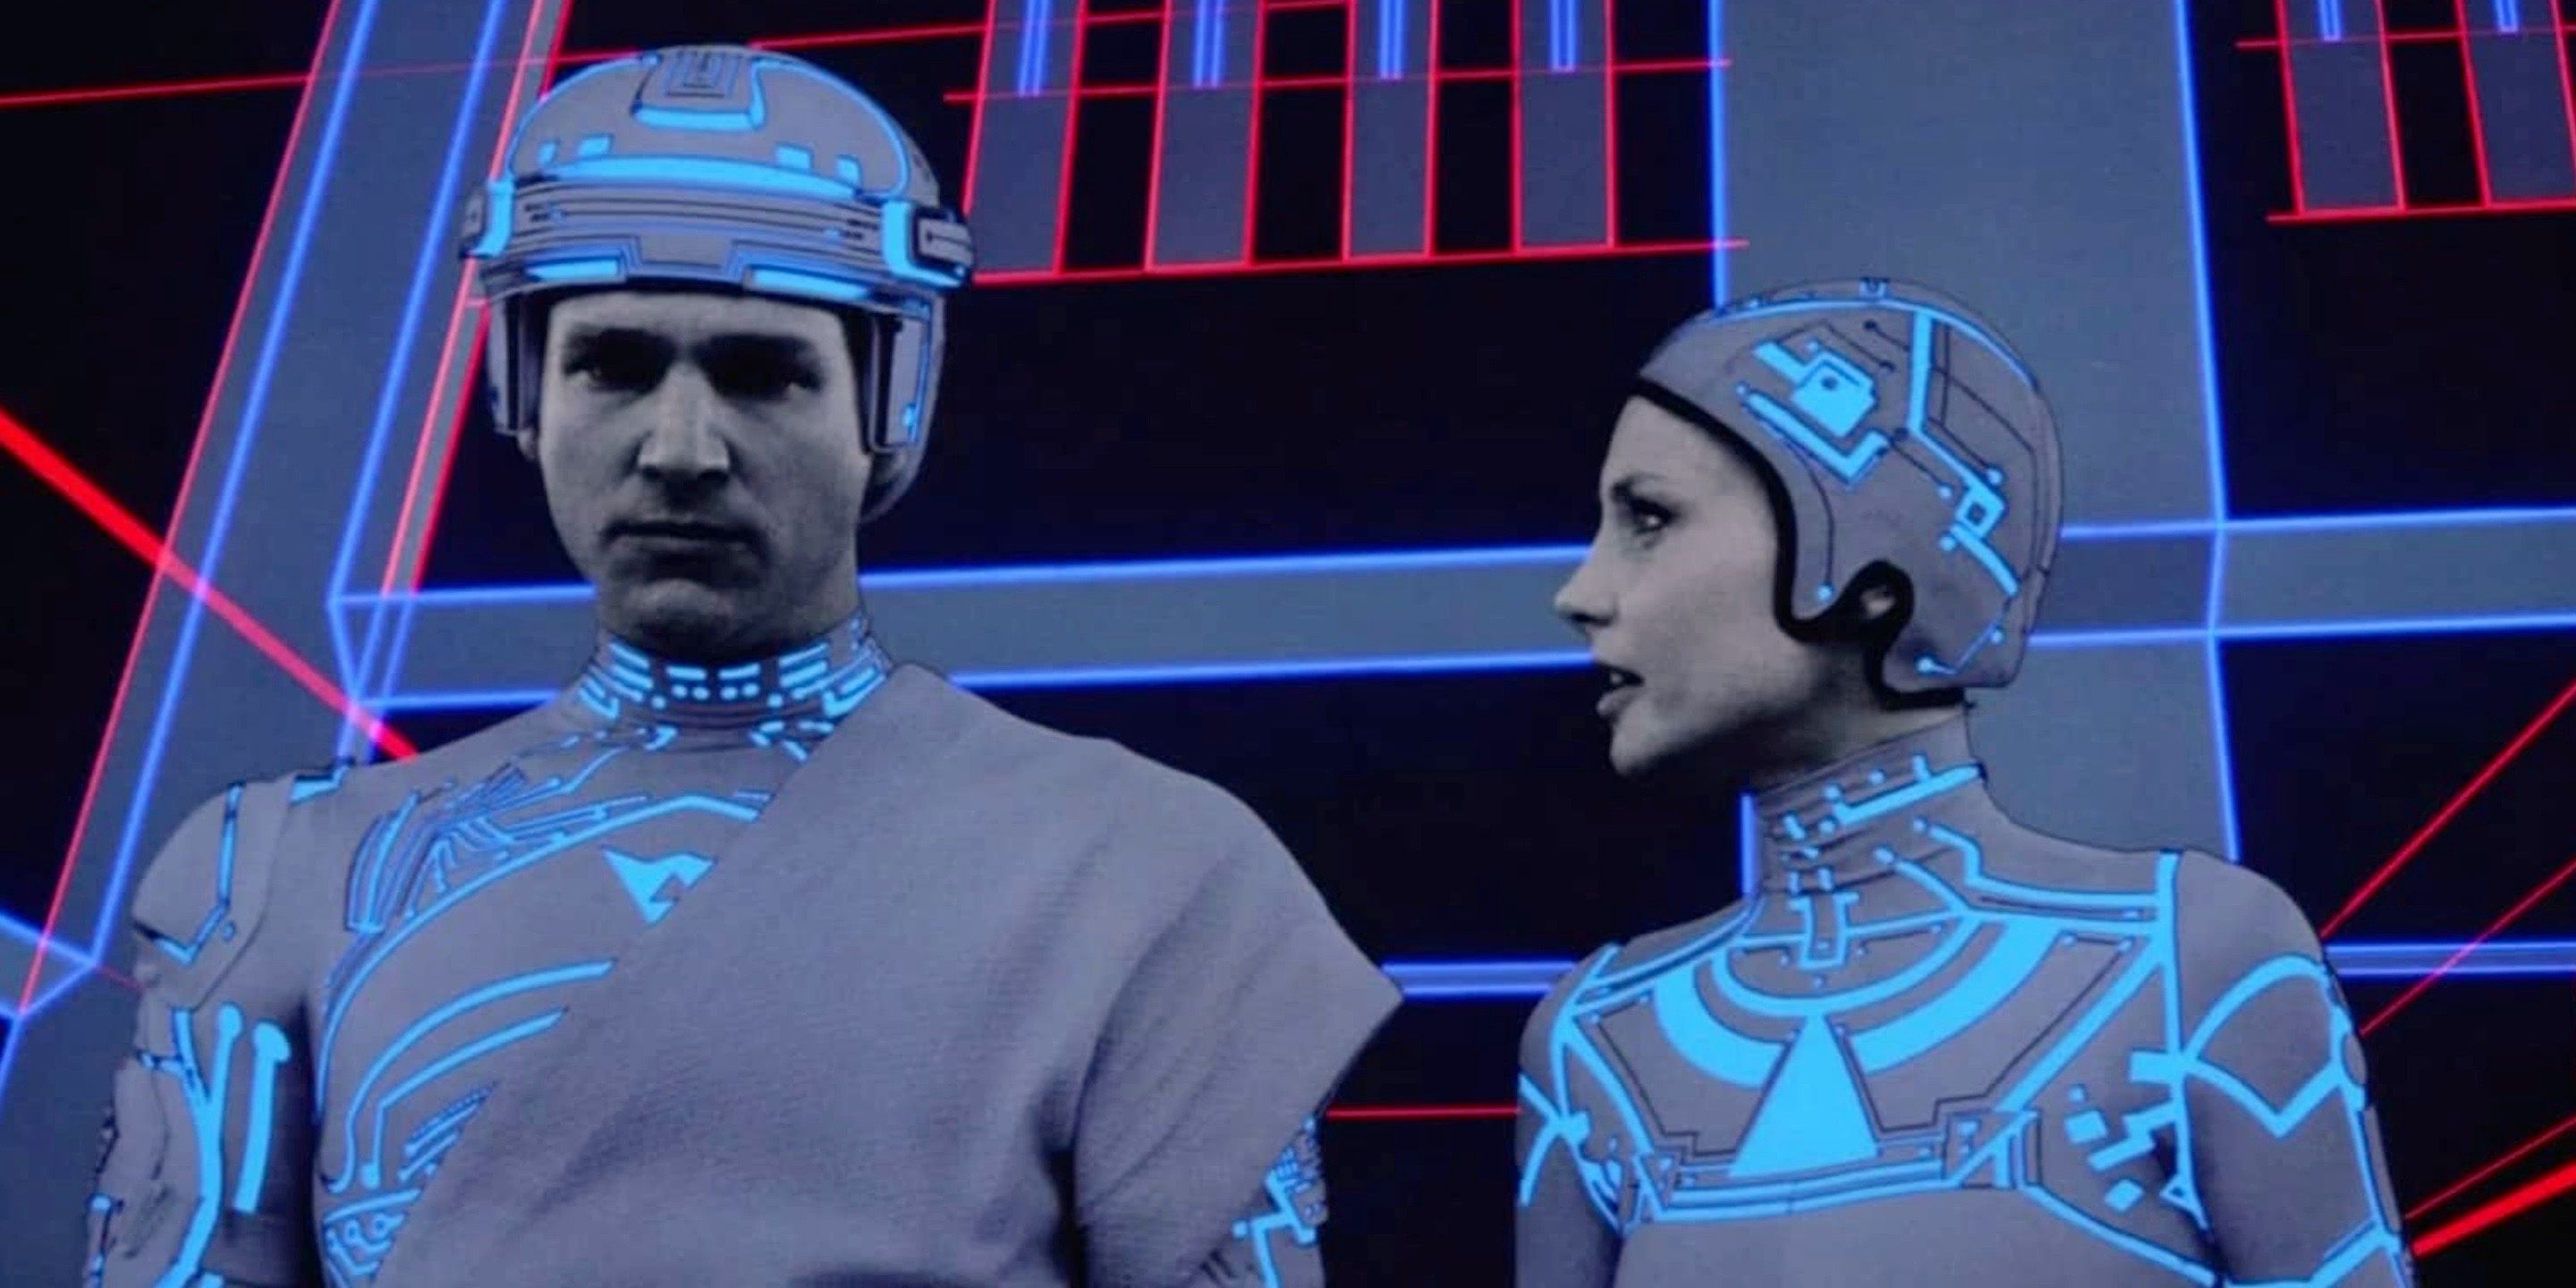 Scene from Tron 1982.